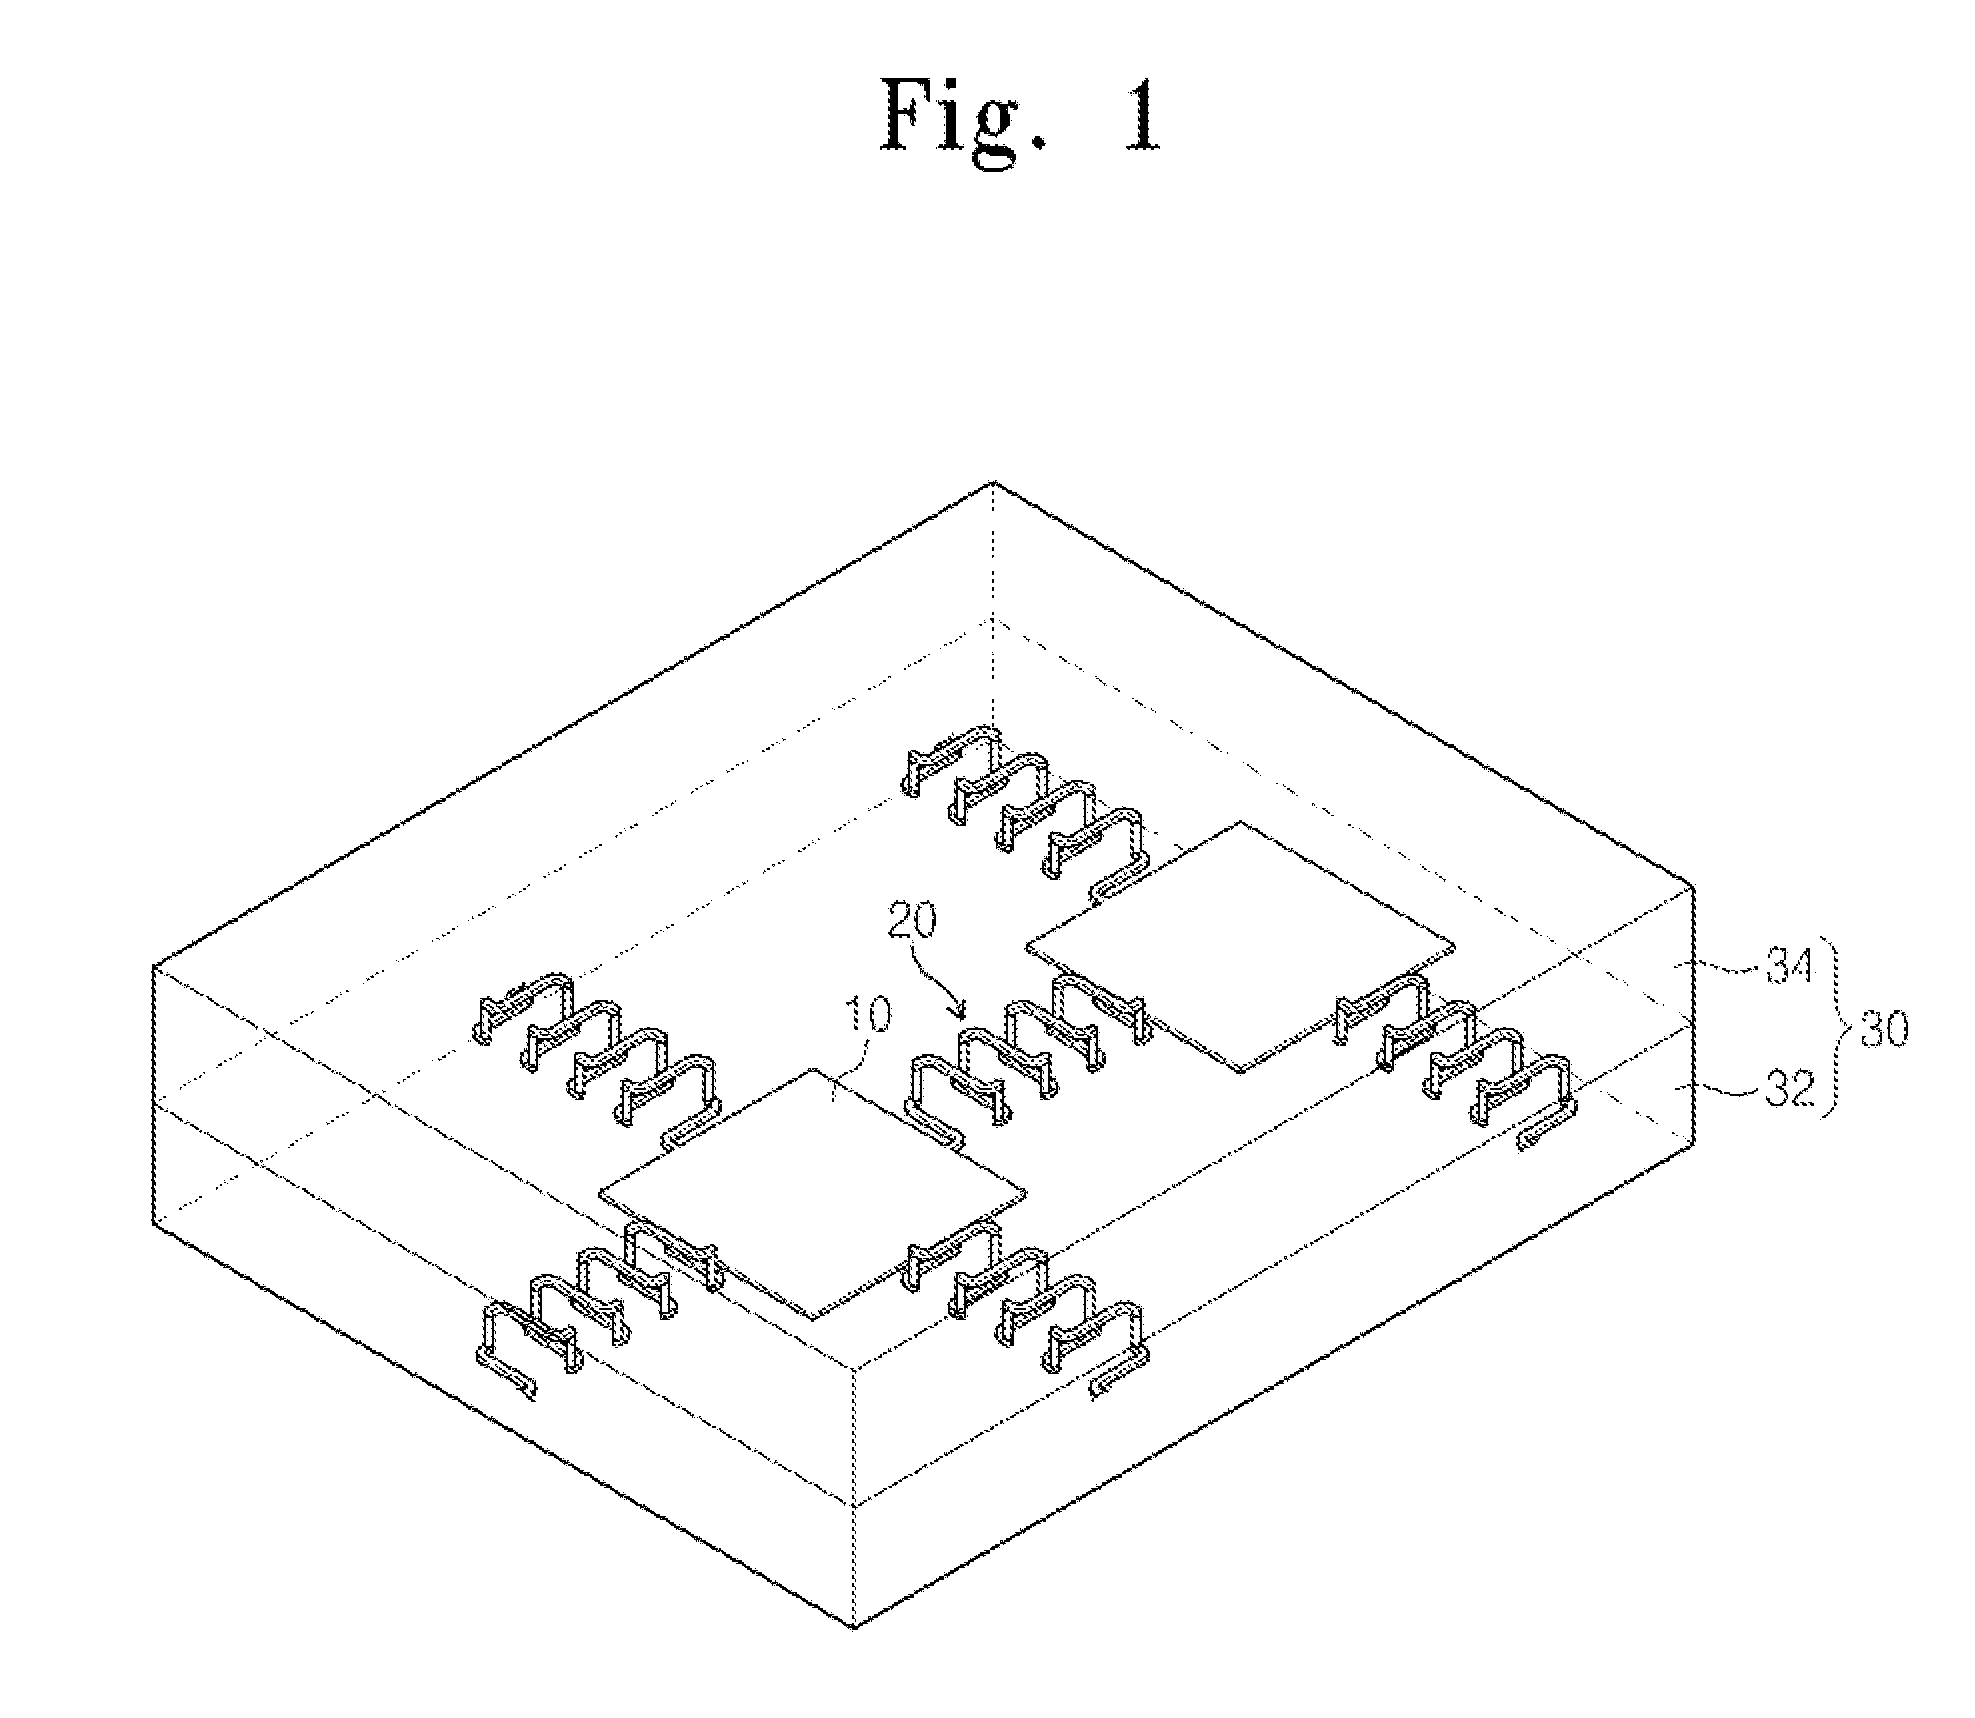 Stretchable electronic device and method of manufacturing same